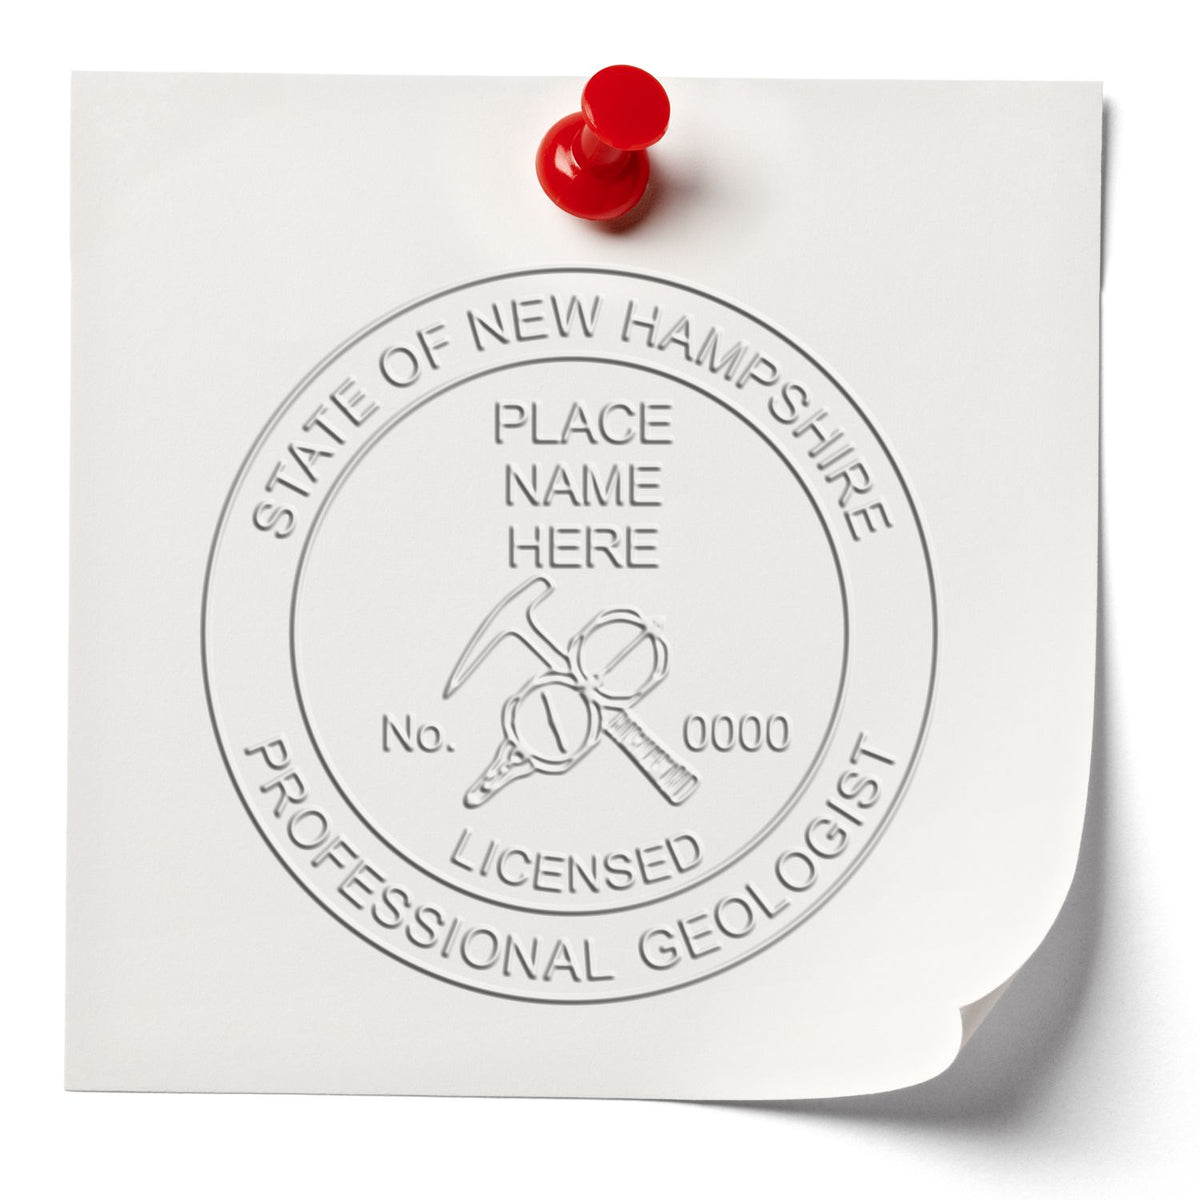 An in use photo of the New Hampshire Geologist Desk Seal showing a sample imprint on a cardstock